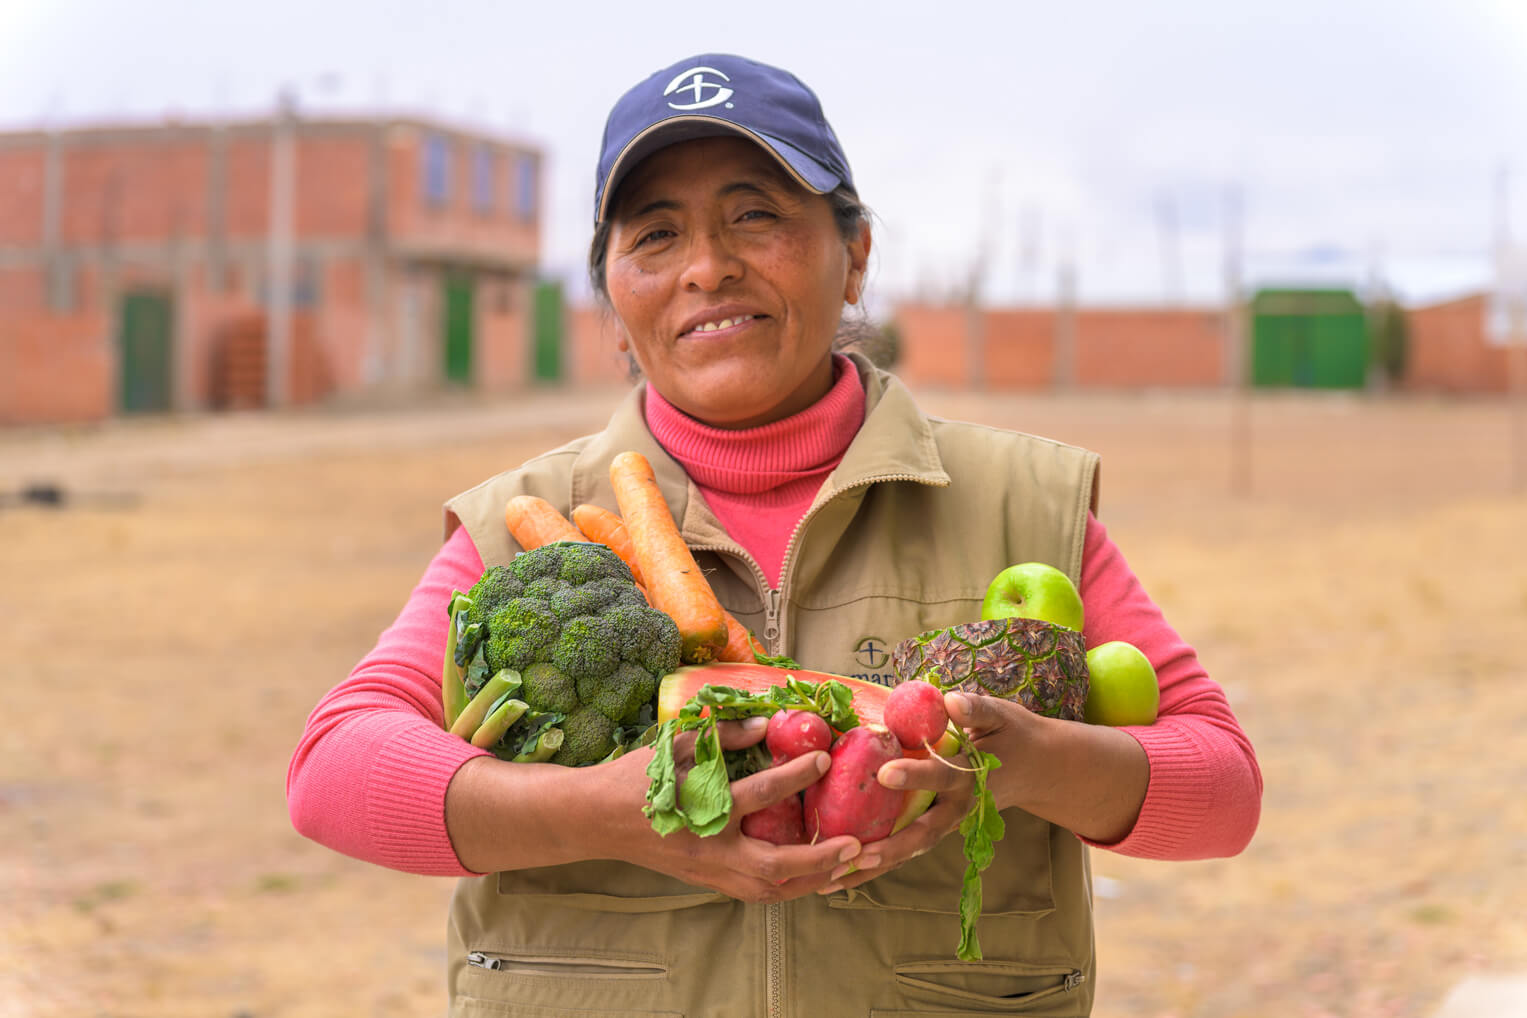 SP nutritionist Lenicia teaches El Alto residents how to prepare nutritious meals for their families.